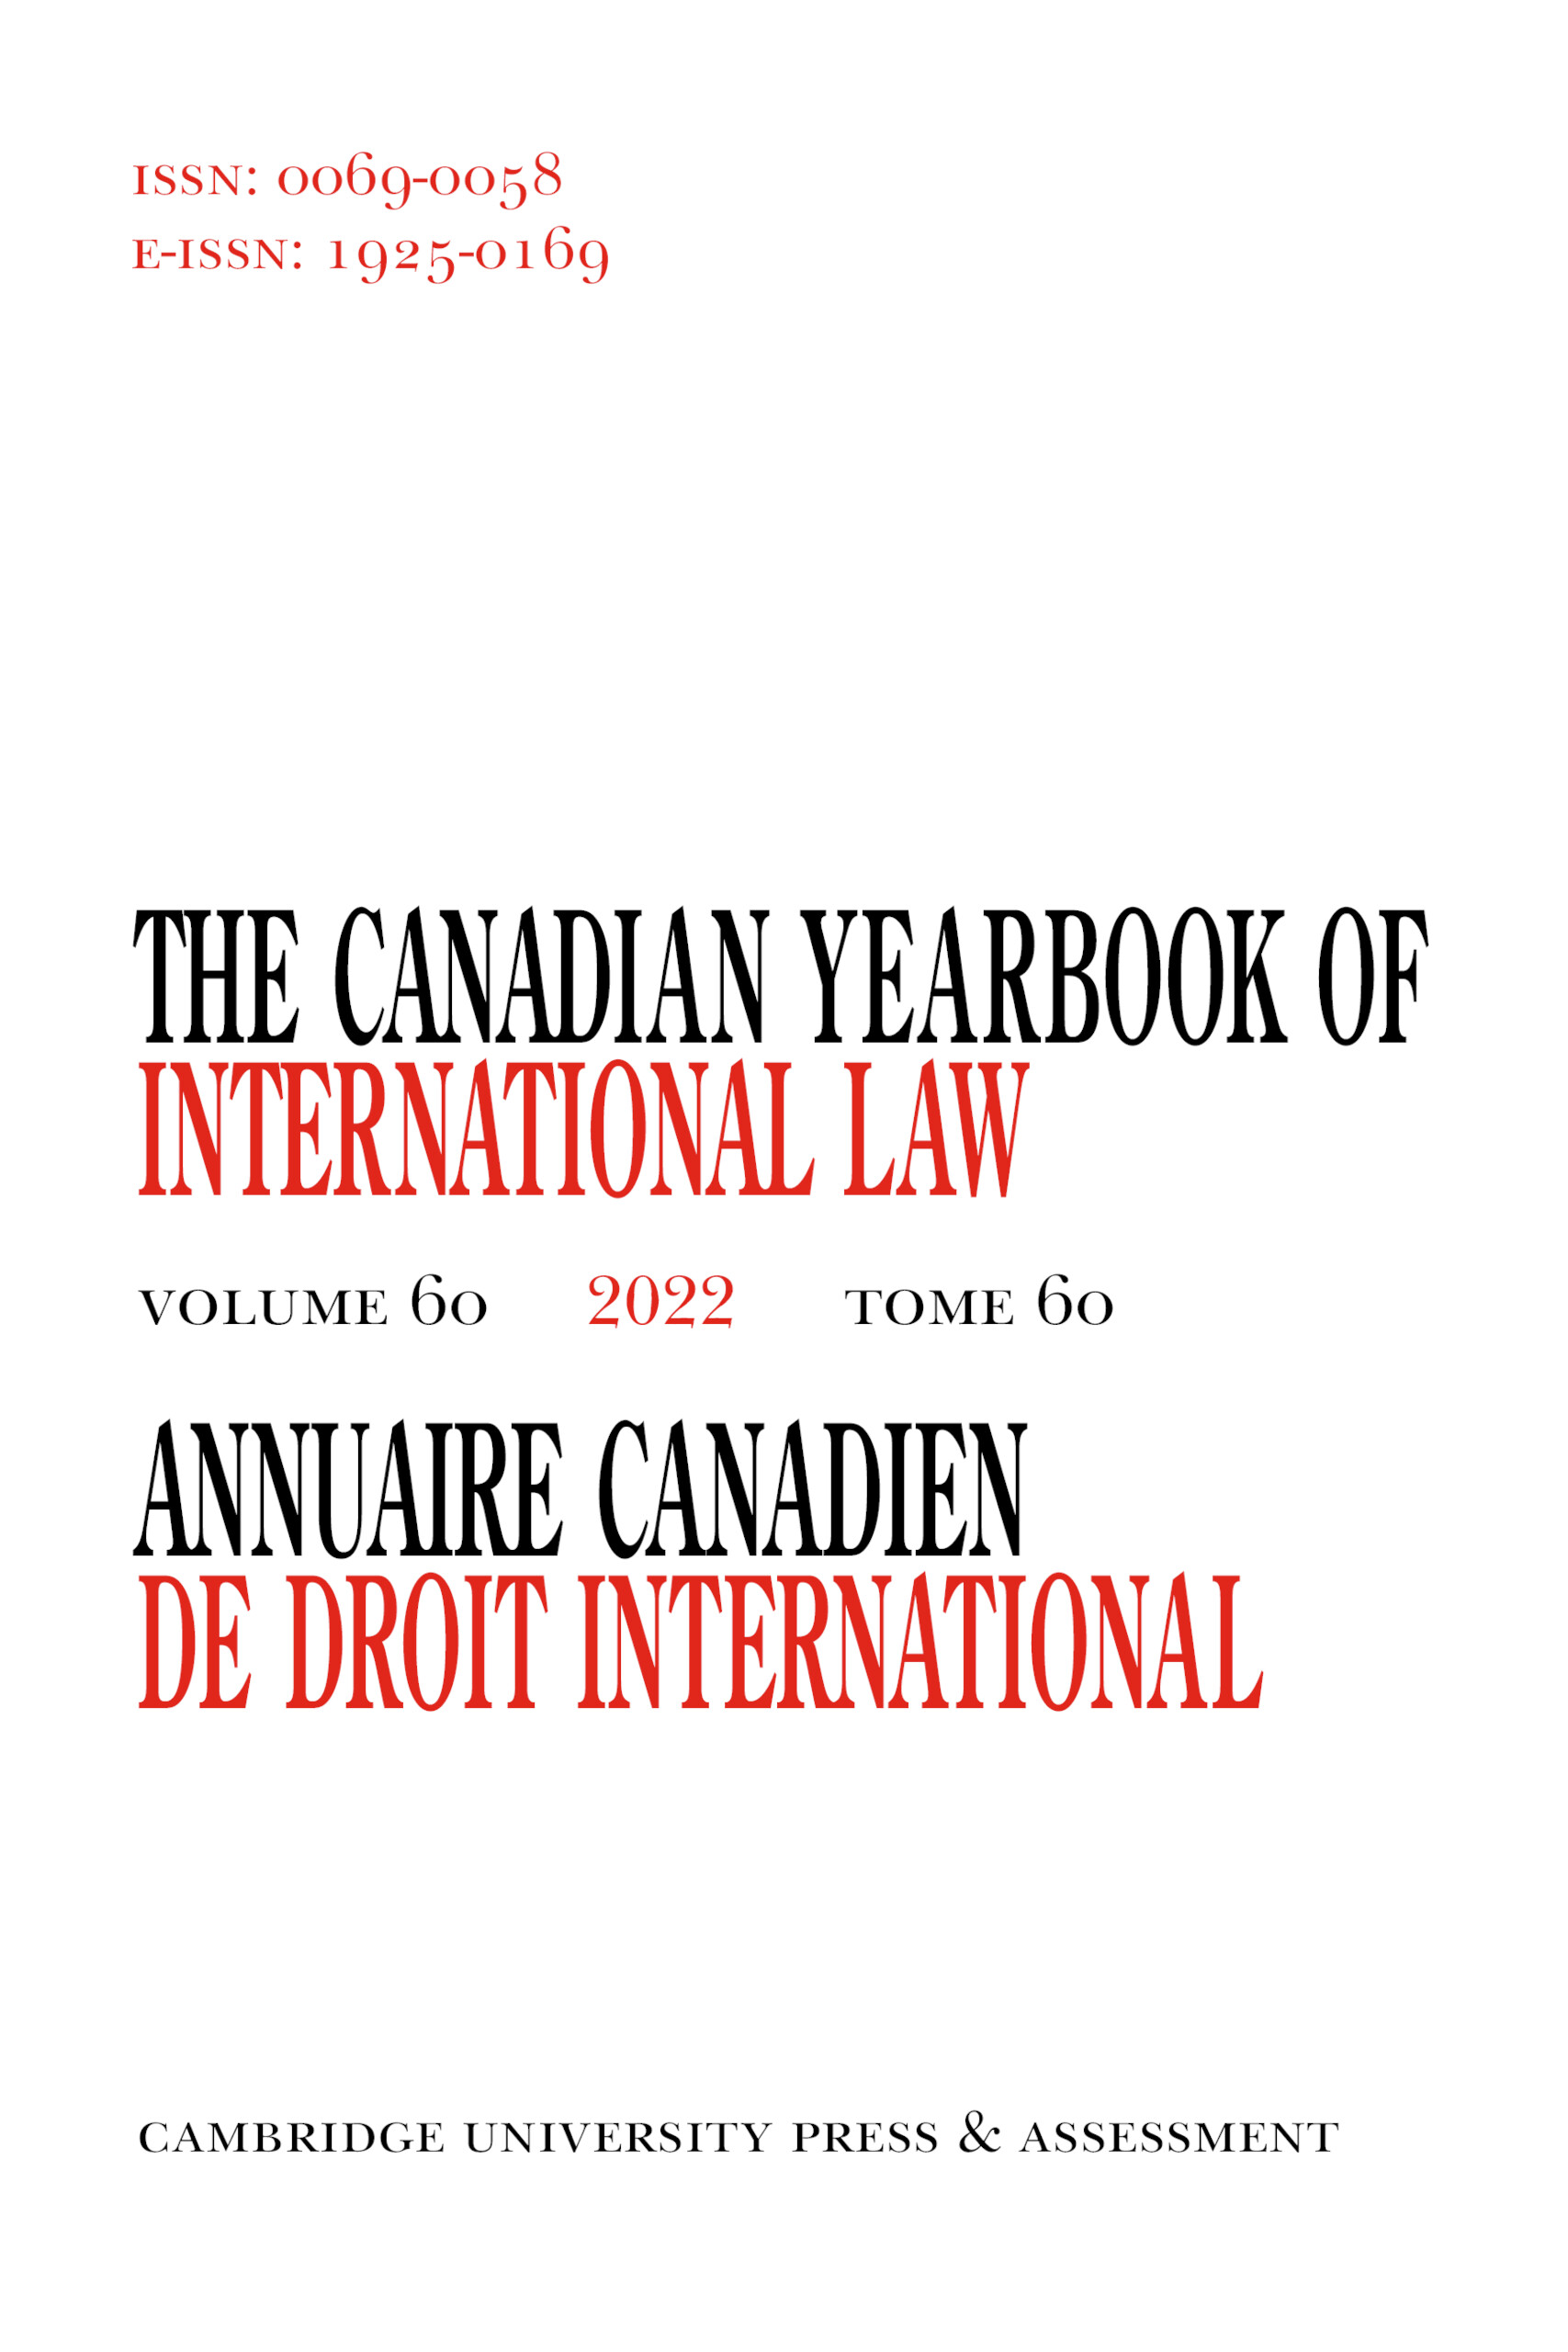 Canadian Yearbook of International Law/Annuaire canadien de droit international